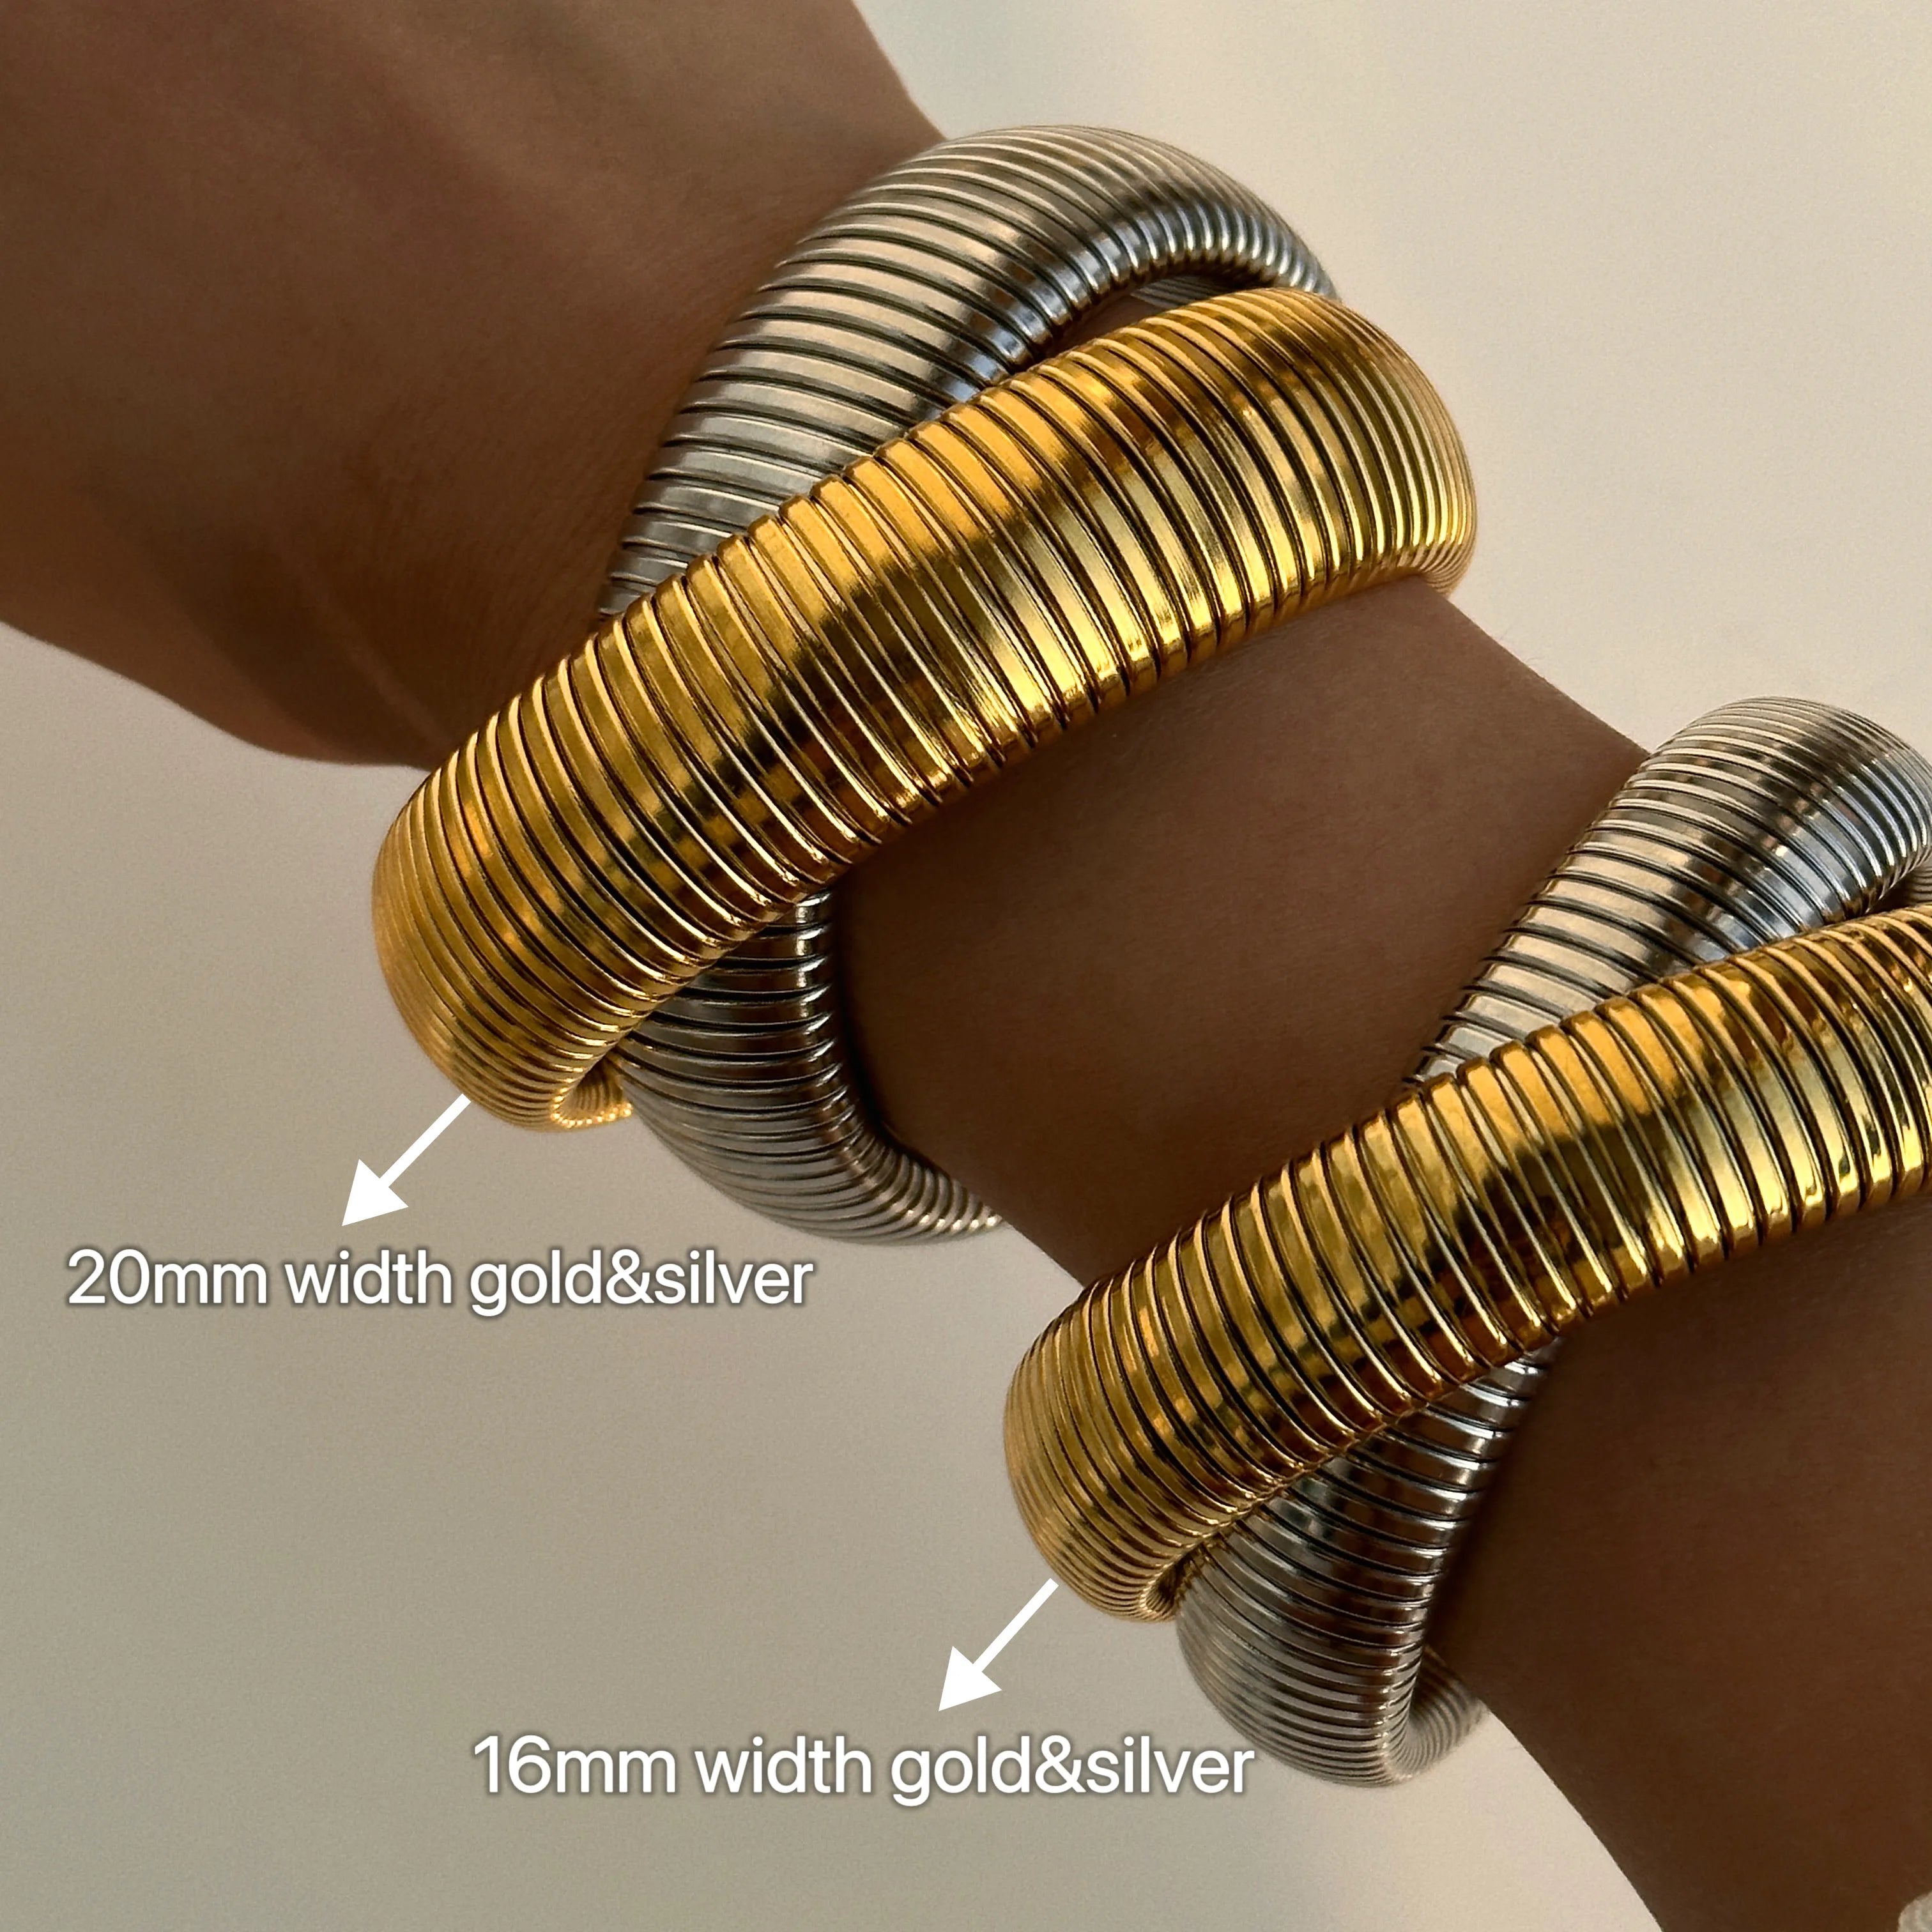 “Two In One” Double Twisted Cobra Bracelet